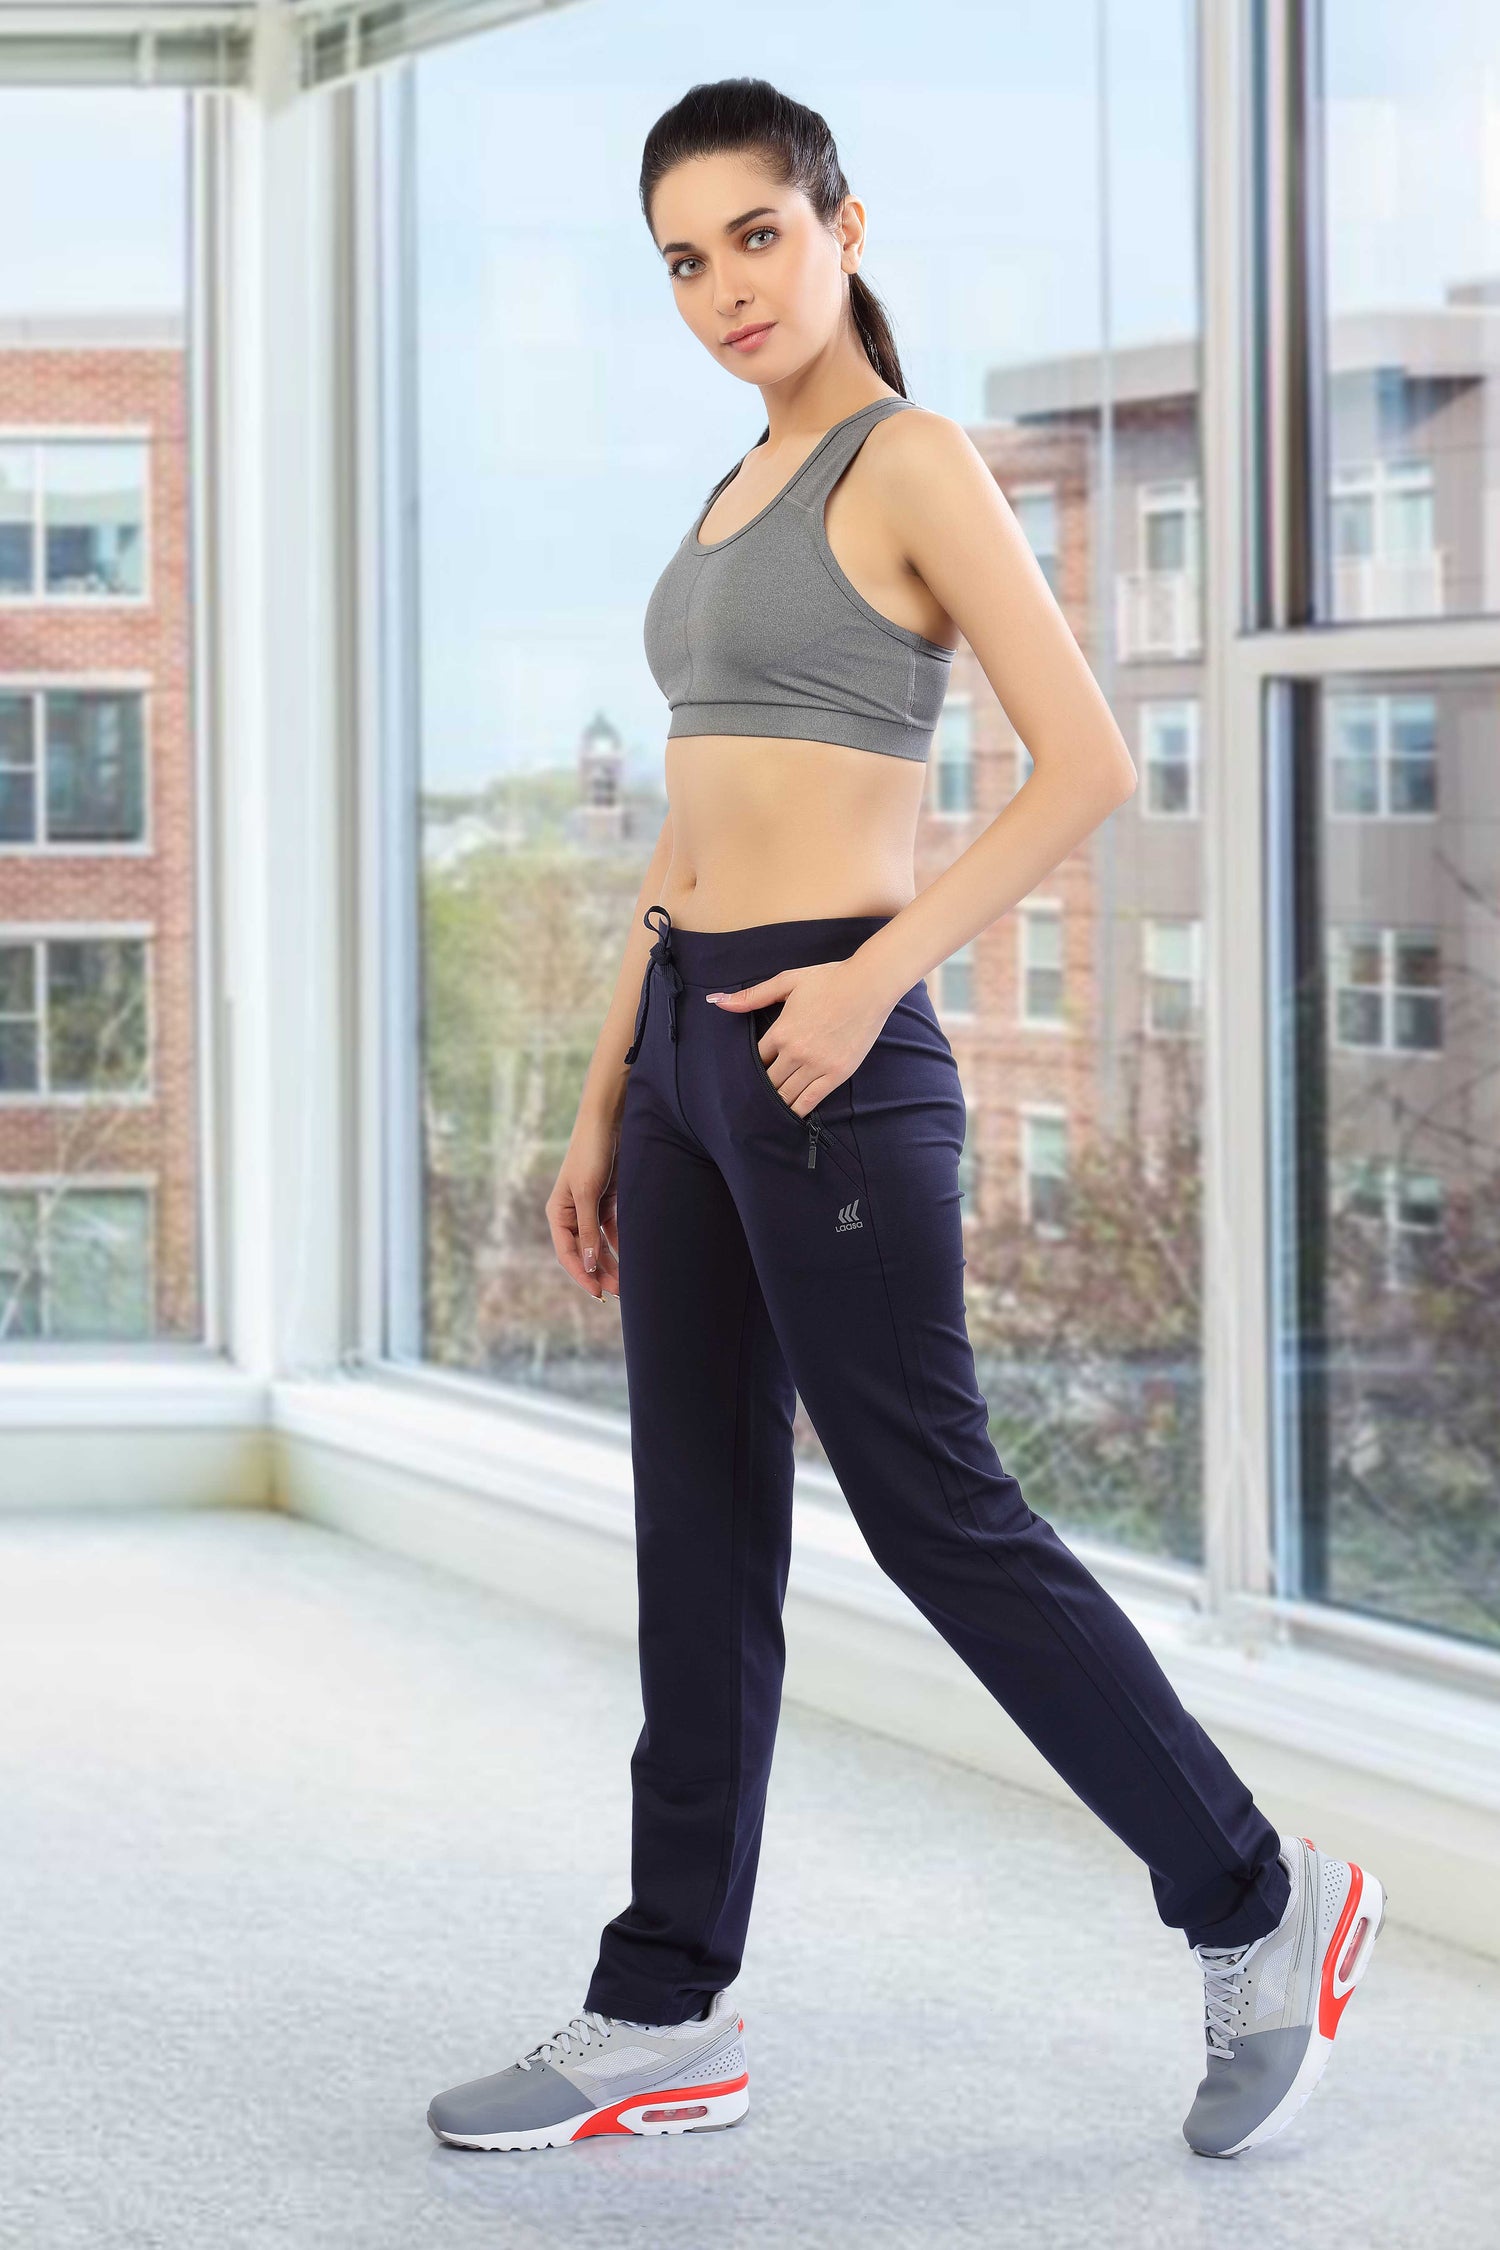 Gym Track Pants For Women - Buy Gym Track Pants For Women online